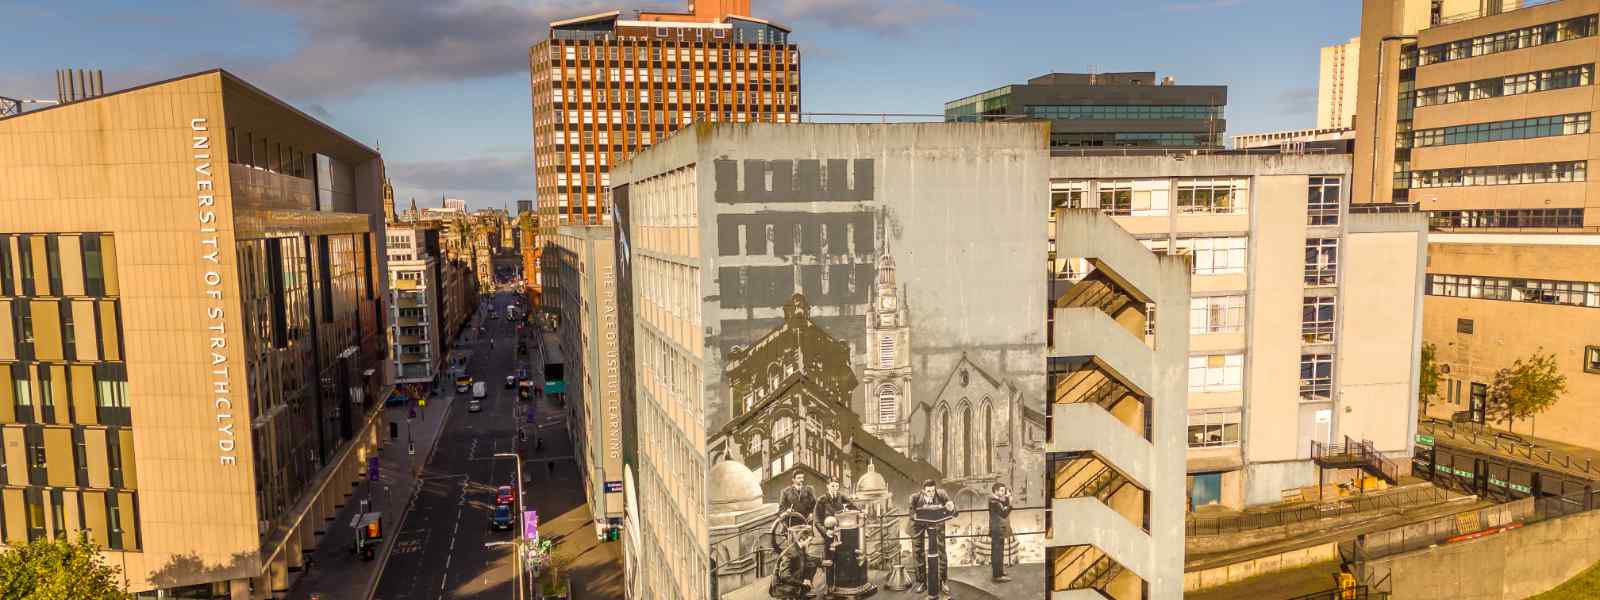 Aerial view of Strathclyde campus with mural